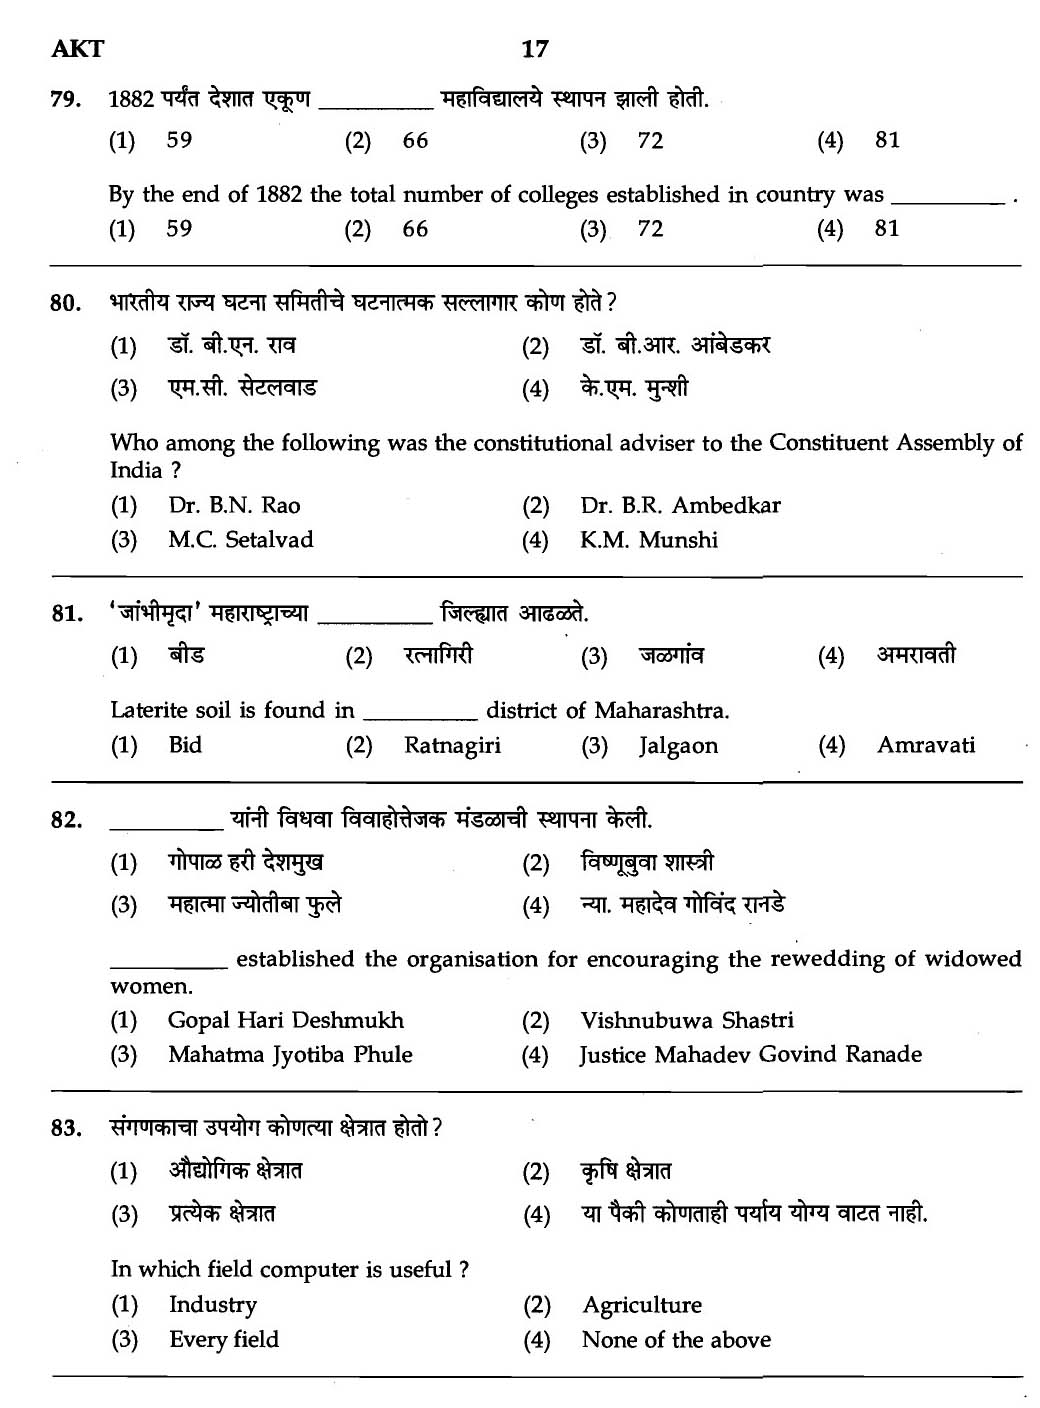 MPSC Agricultural Services Exam 2007 General Question Paper 15